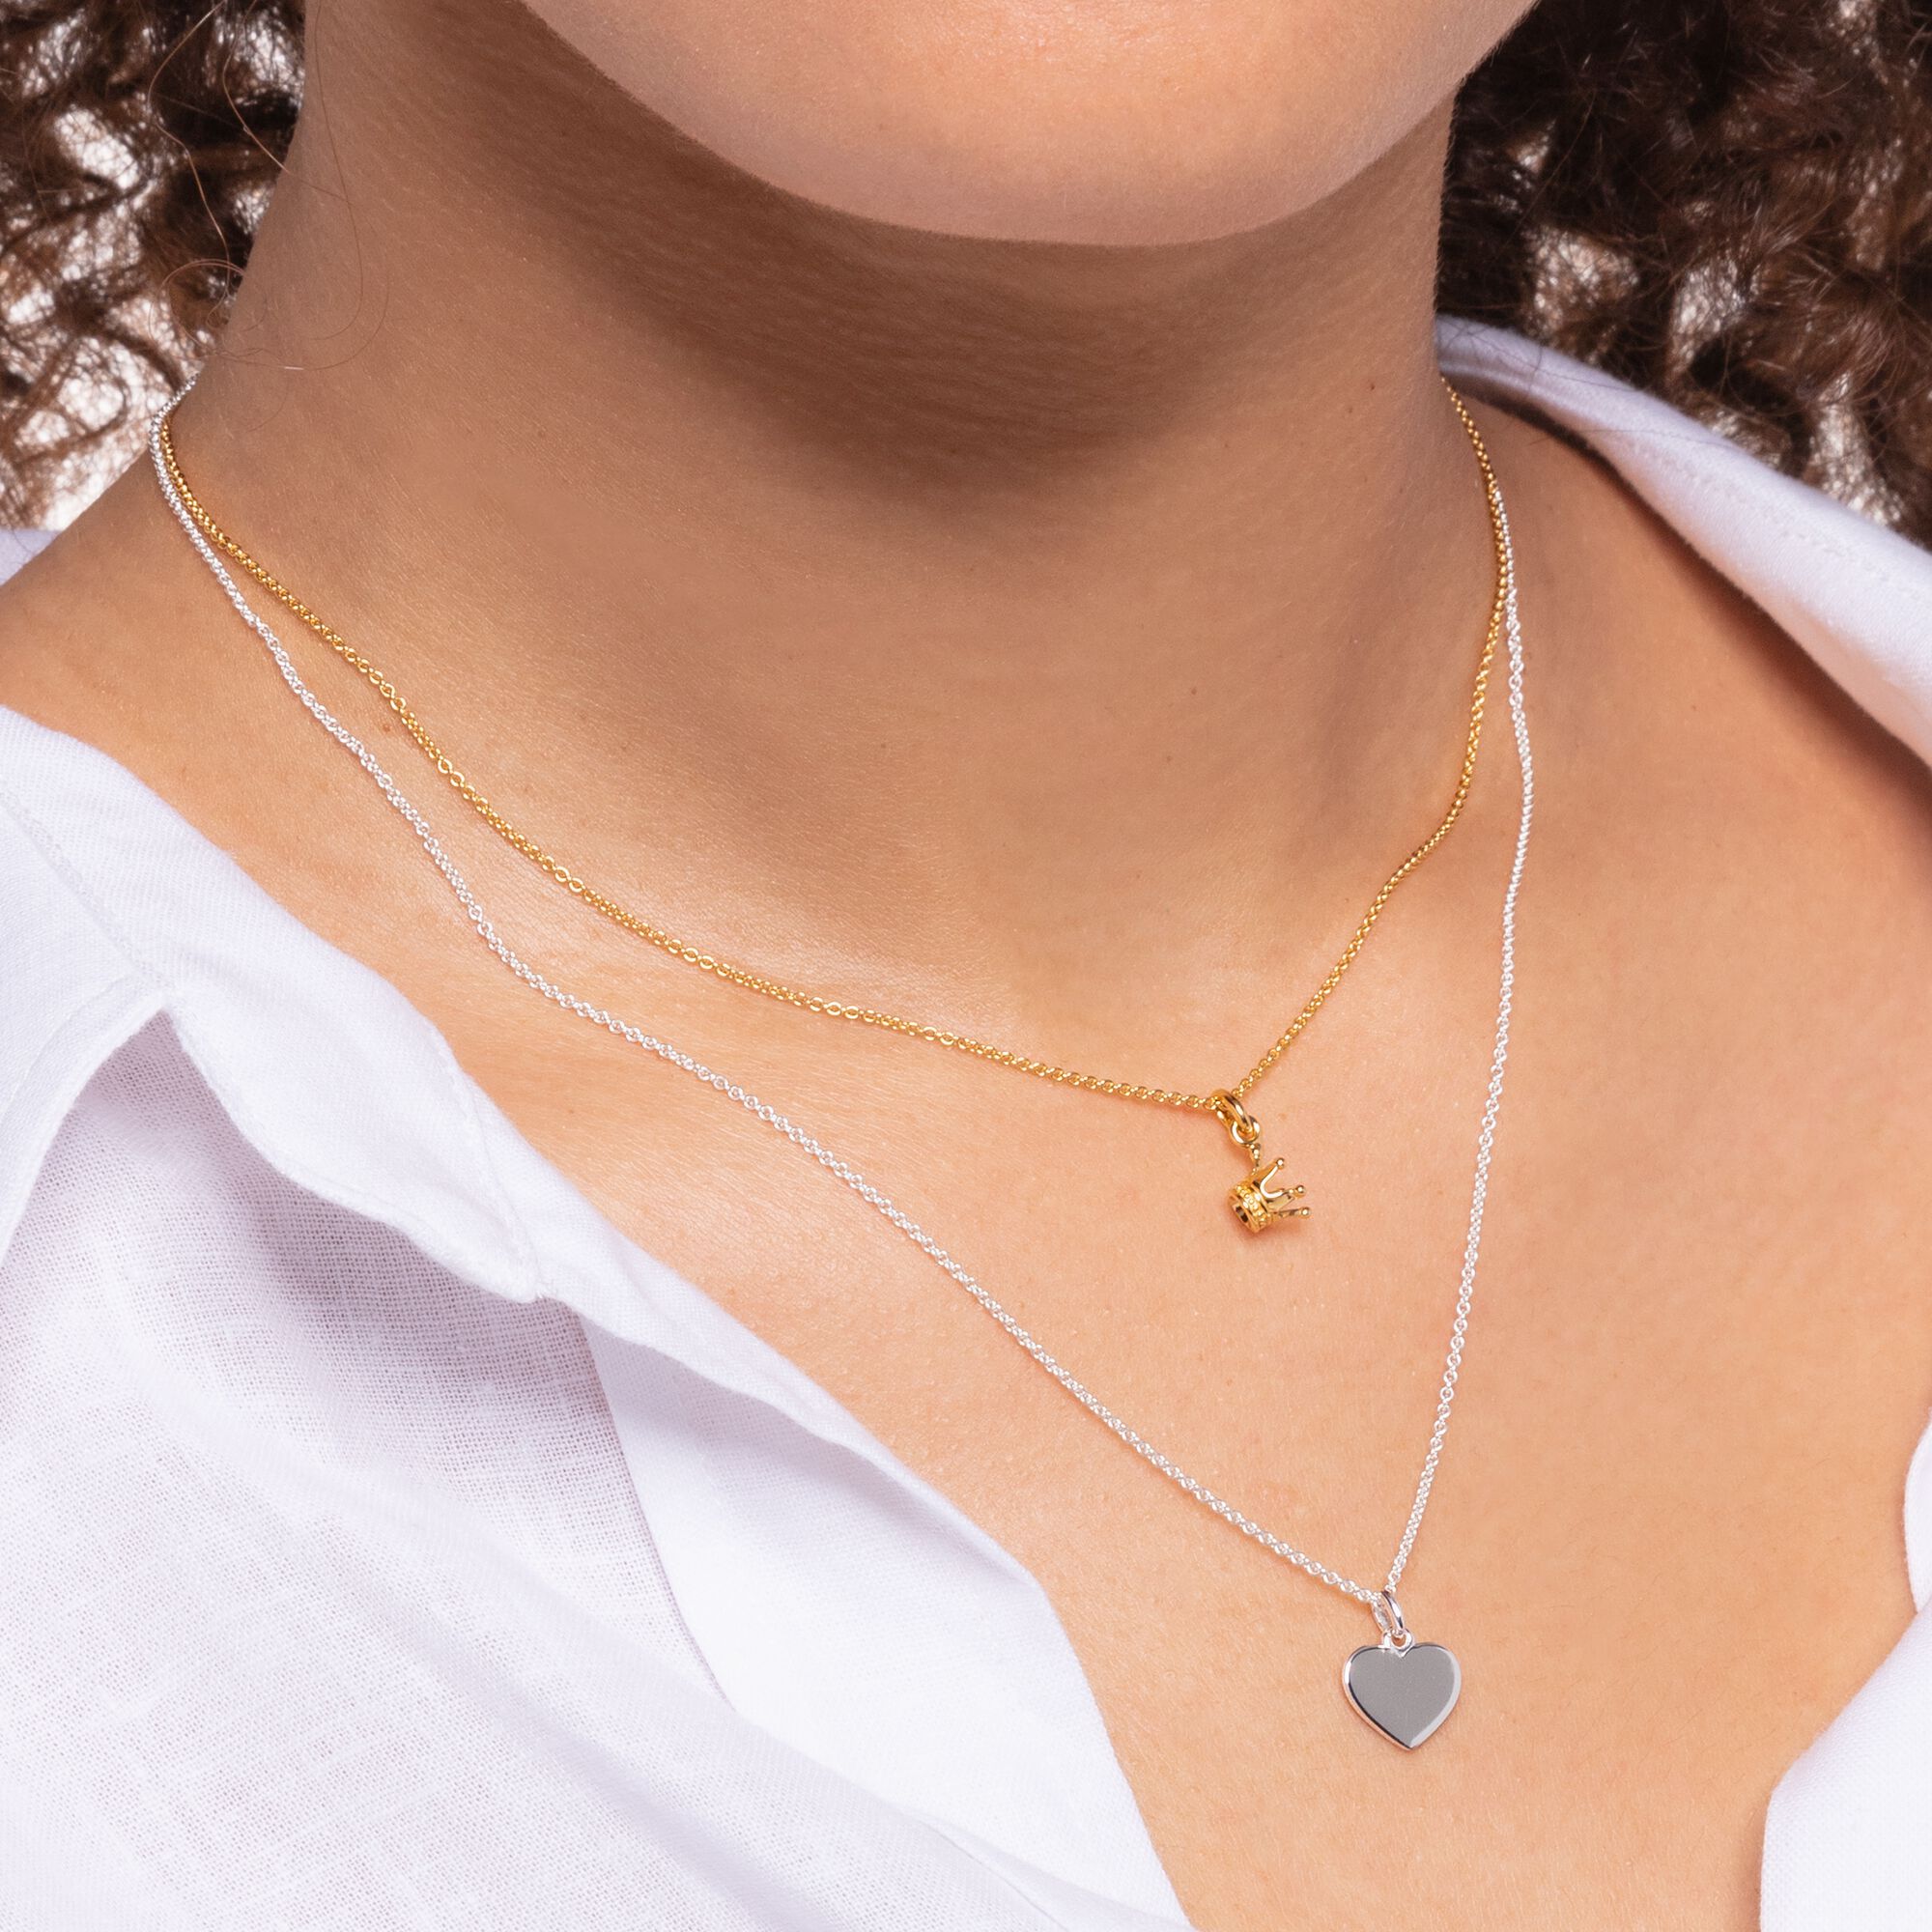 Necklace with heart pendant – THOMAS SABO